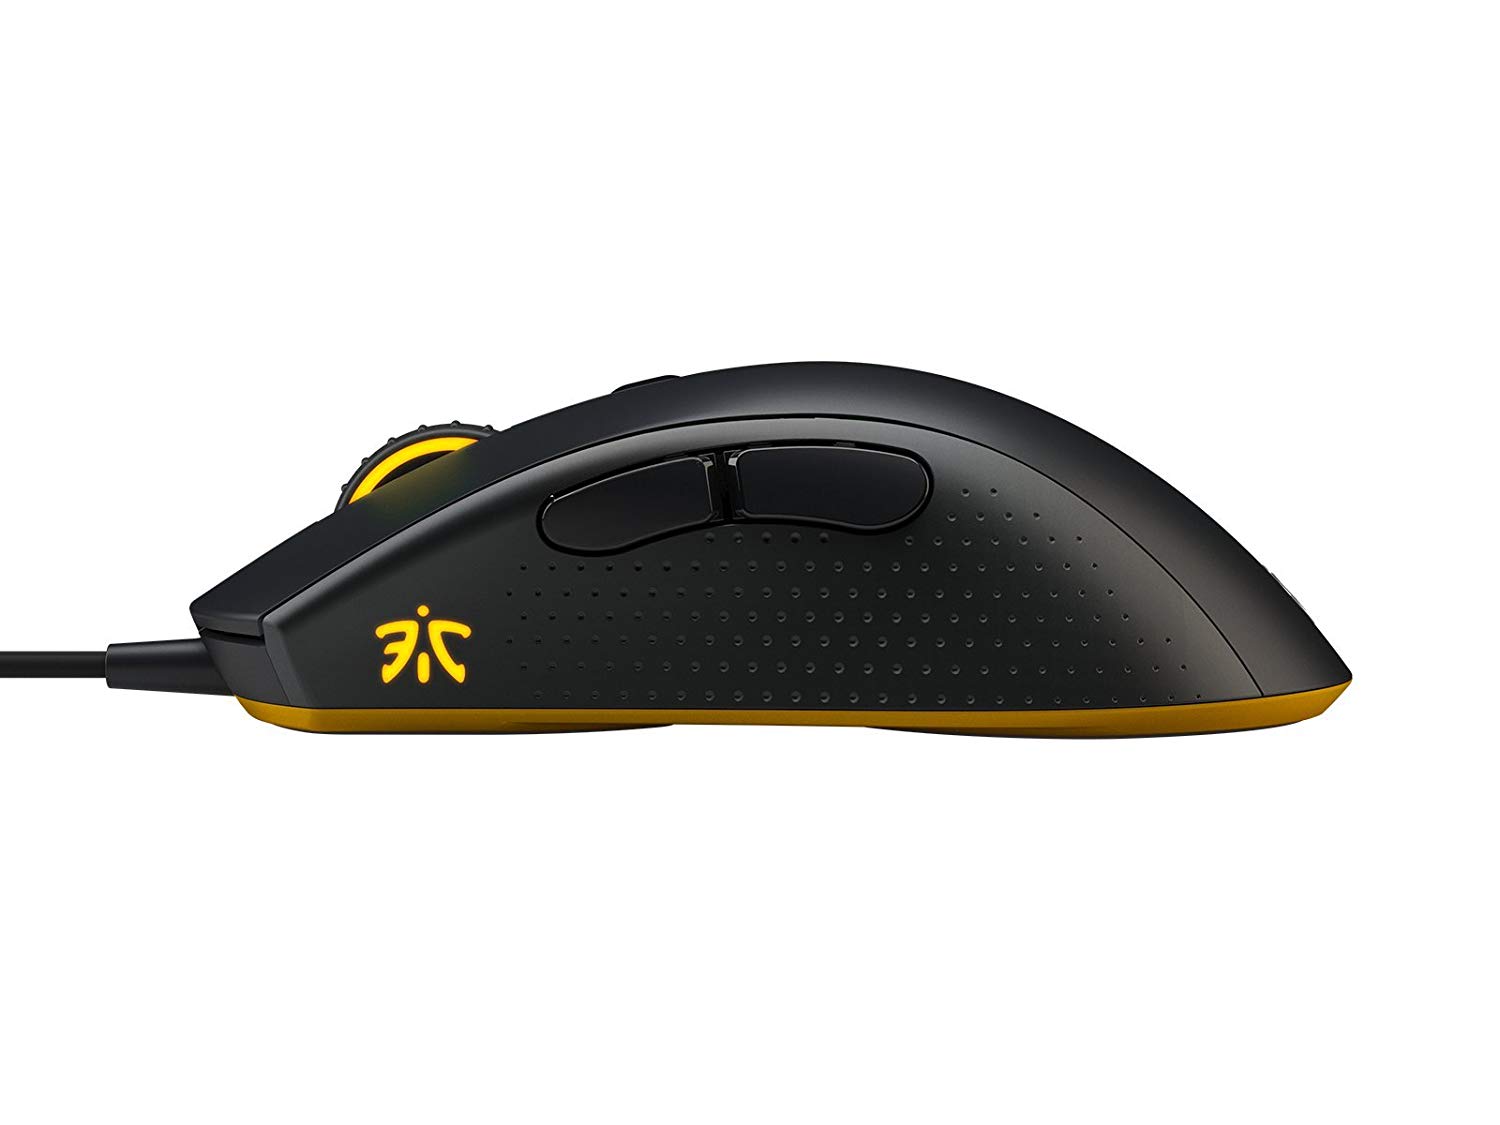 FNATIC GEAR FLICK 2 WIRED SYMMETRICAL GAMING MOUSE - FNC-FLICK-2-N